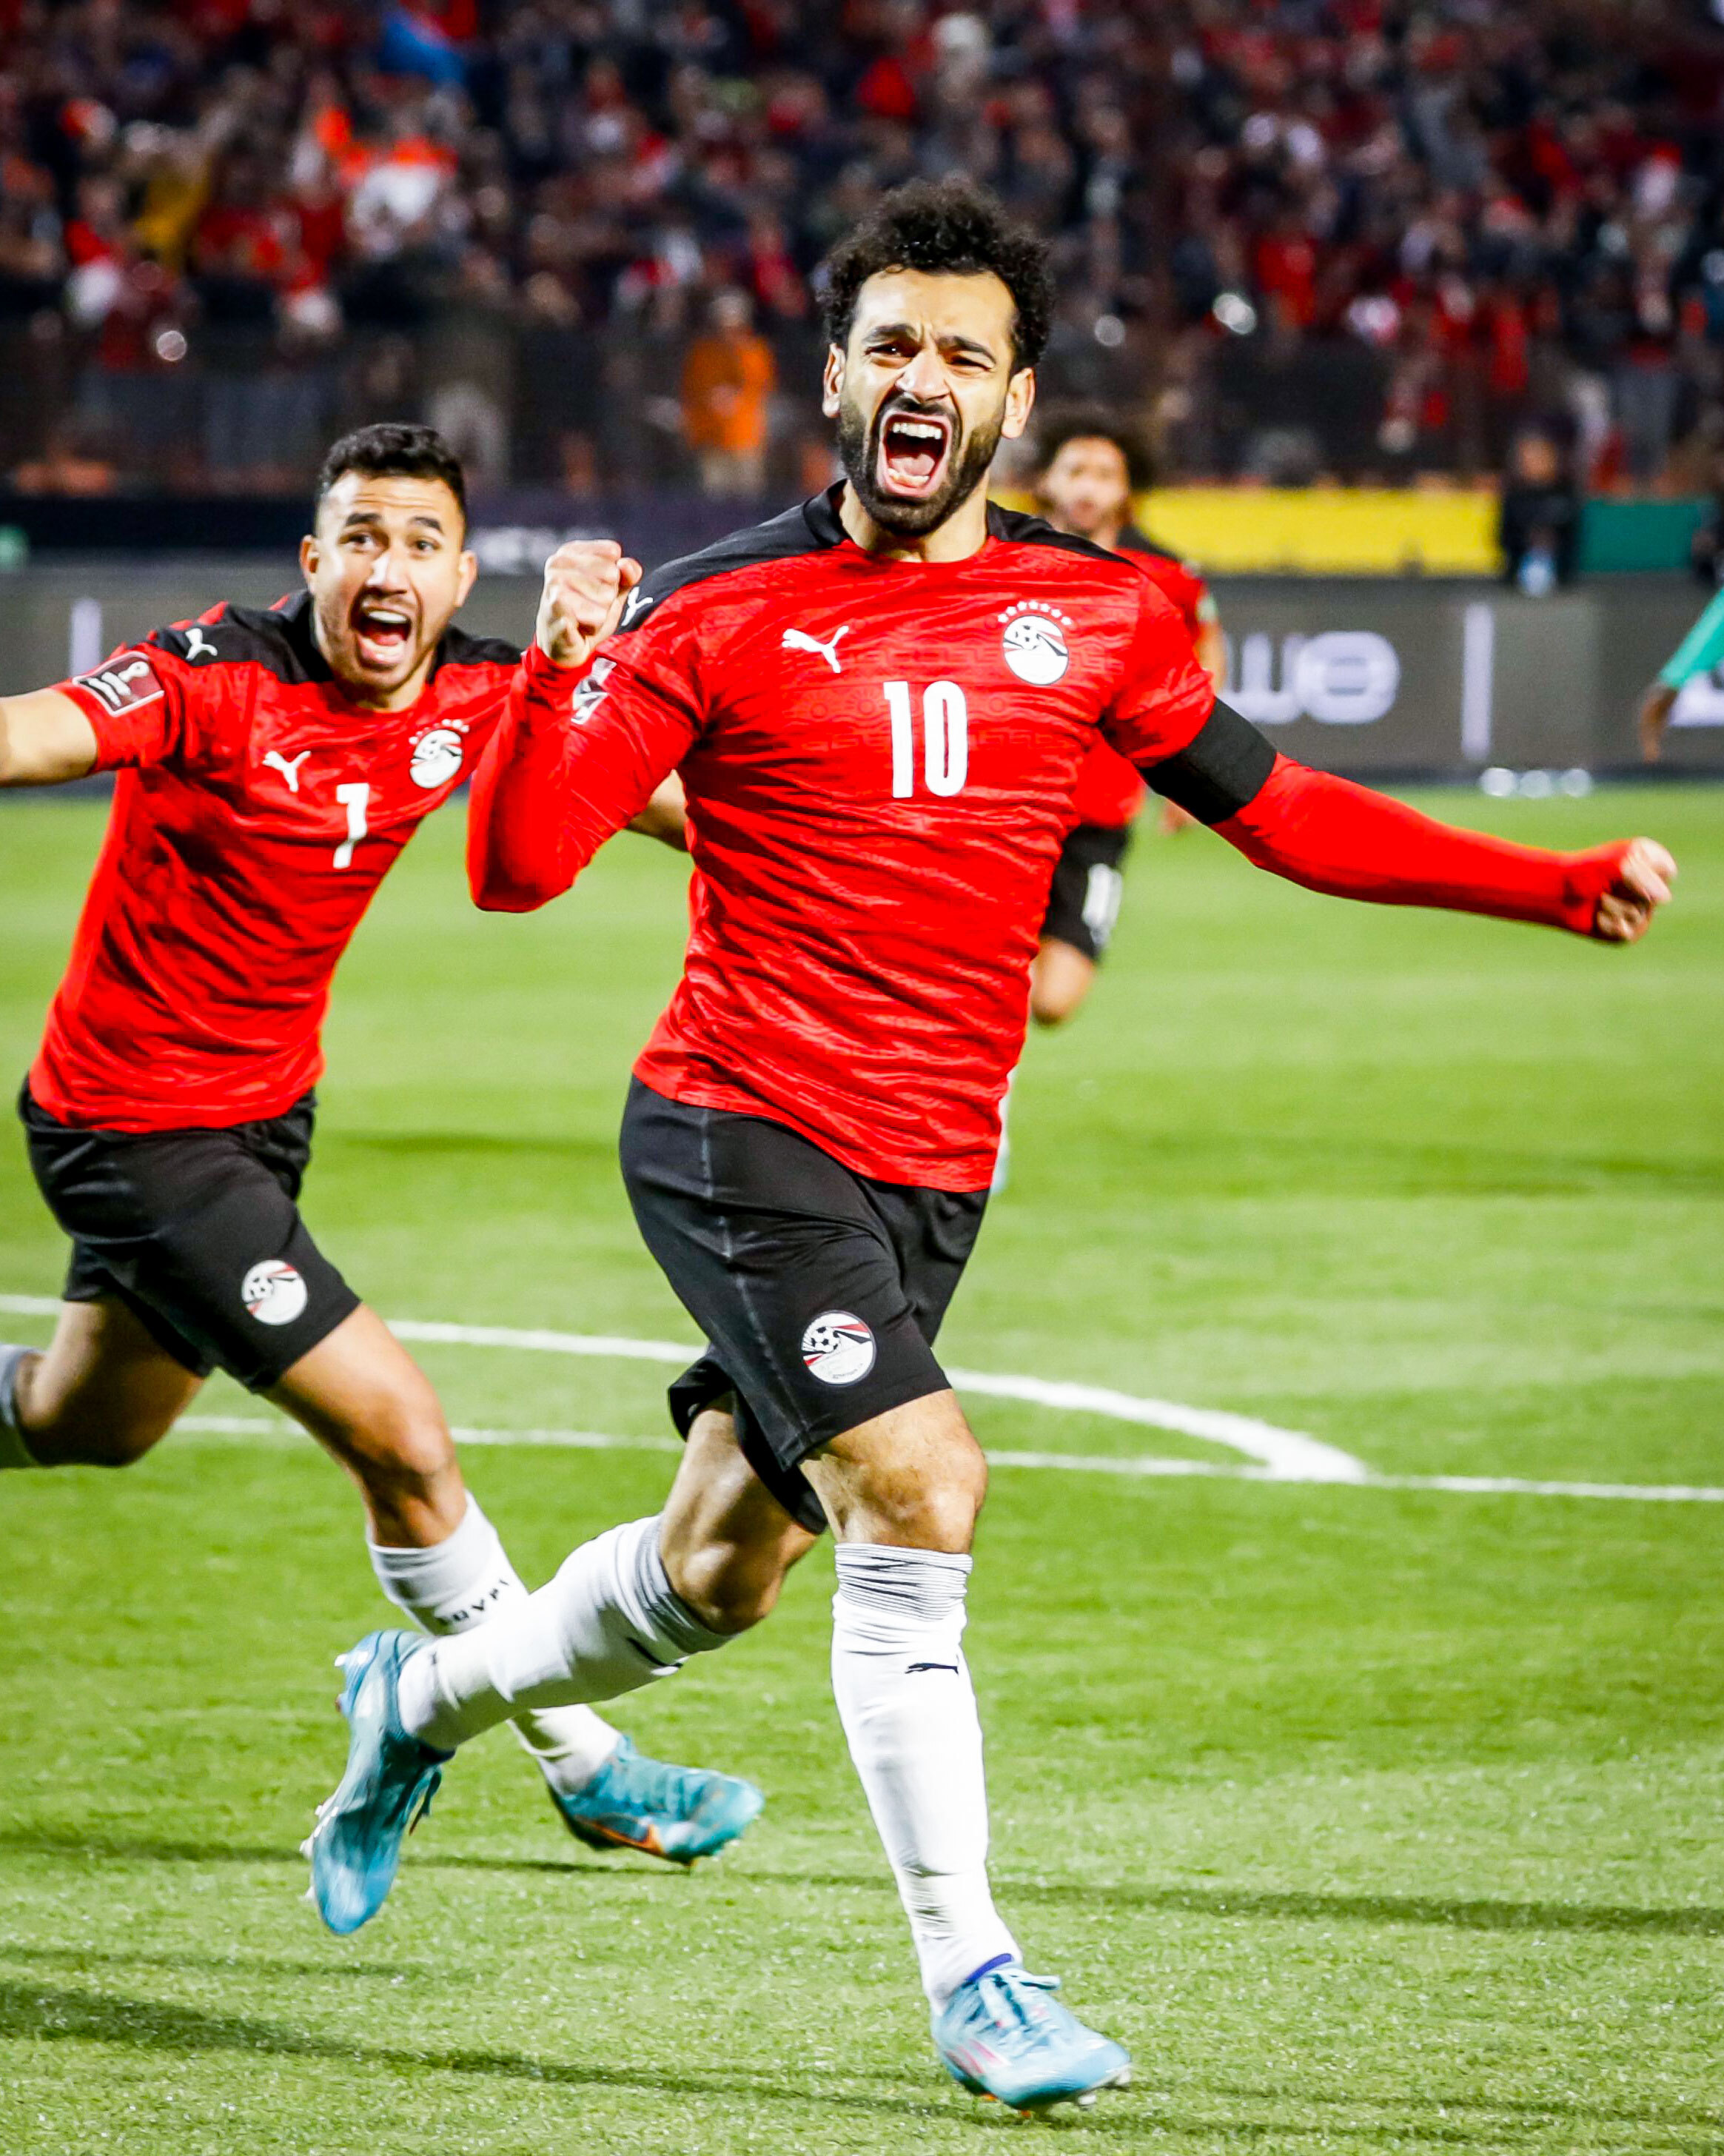 Egypt 1-0 Senegal 1st Leg LIVE: ADVANTAGE Egypt - Mo Salah gets AFCON revenge on Sadio Mane as Senegal were beaten 1-0 by Egypt in the 1st leg of the CAF World Cup Qualifiers